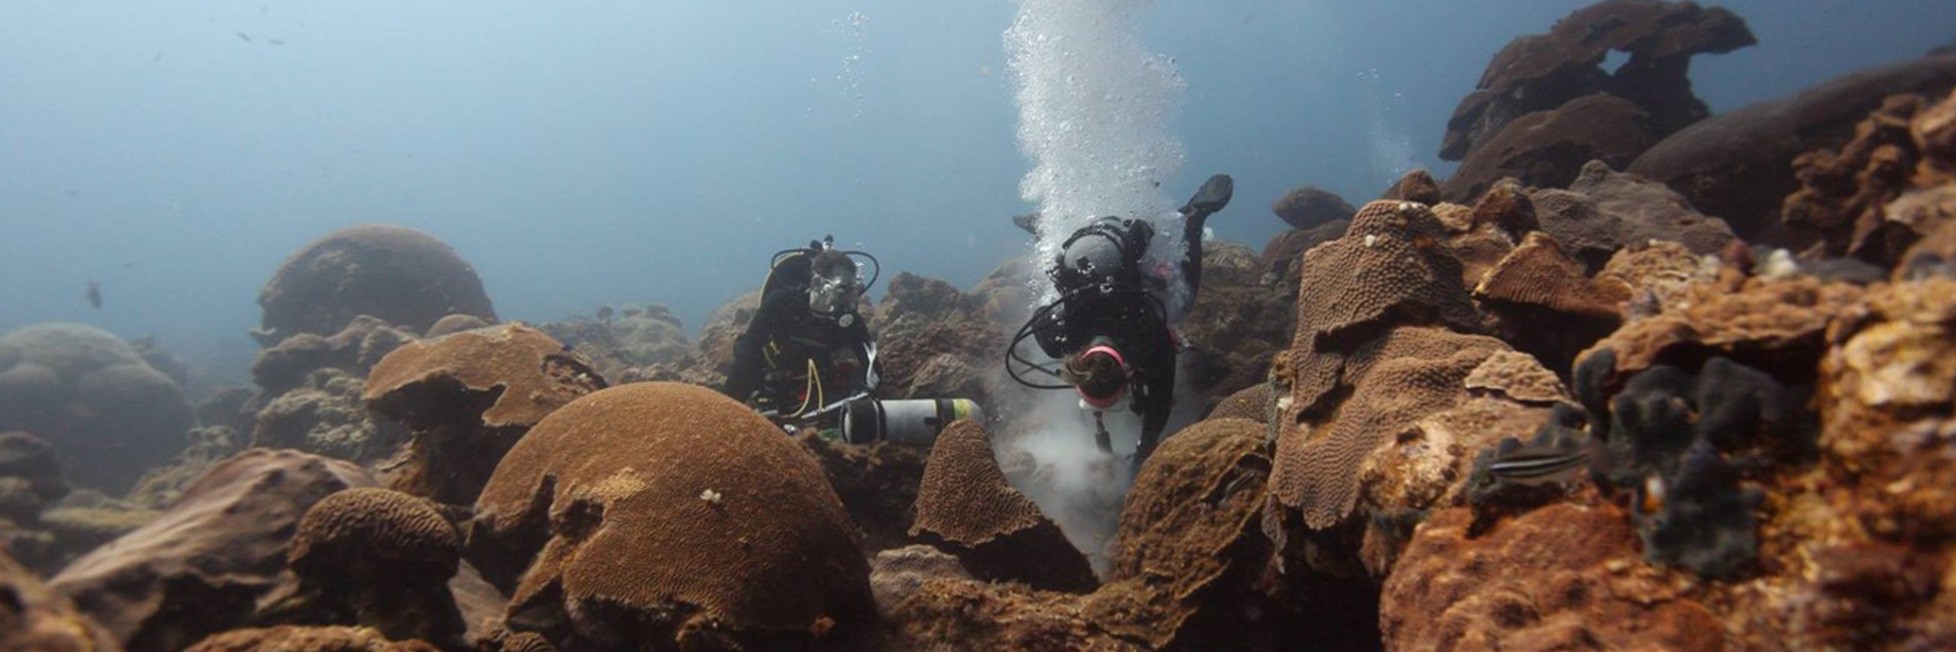 Divers from the ocean chemistry & ecosystems division on the flower garden banks